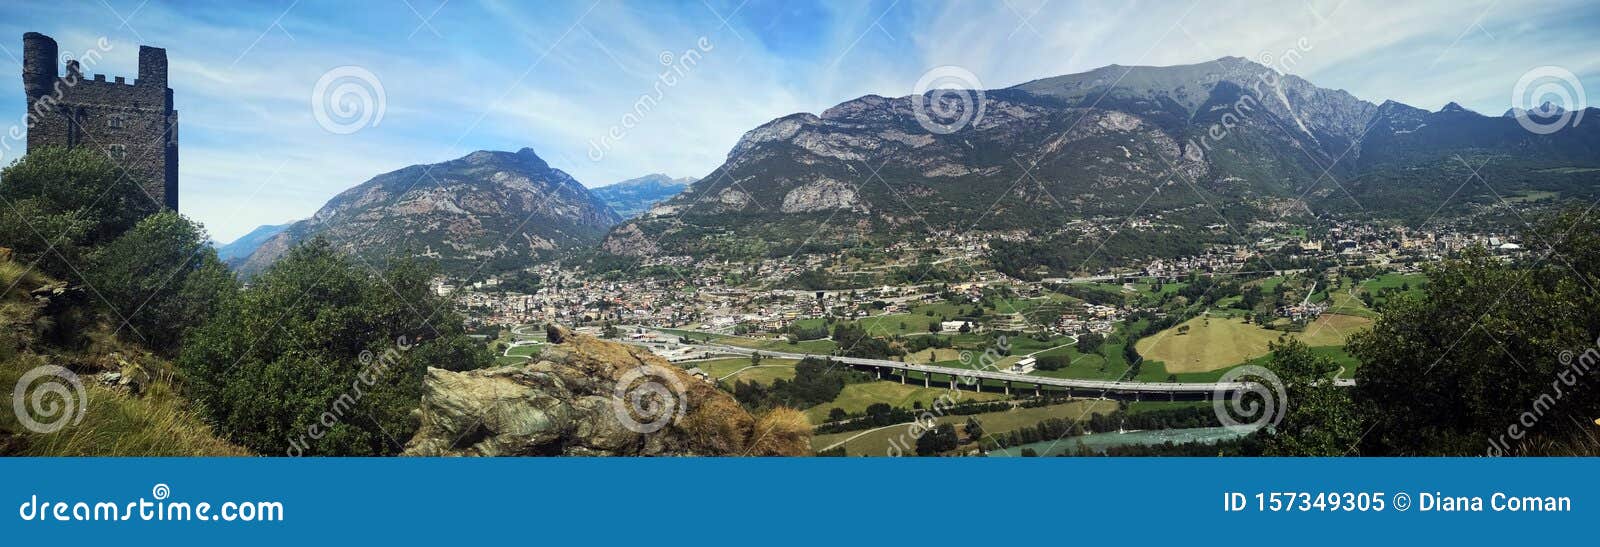 castello di ussel - panoramic view in the valley